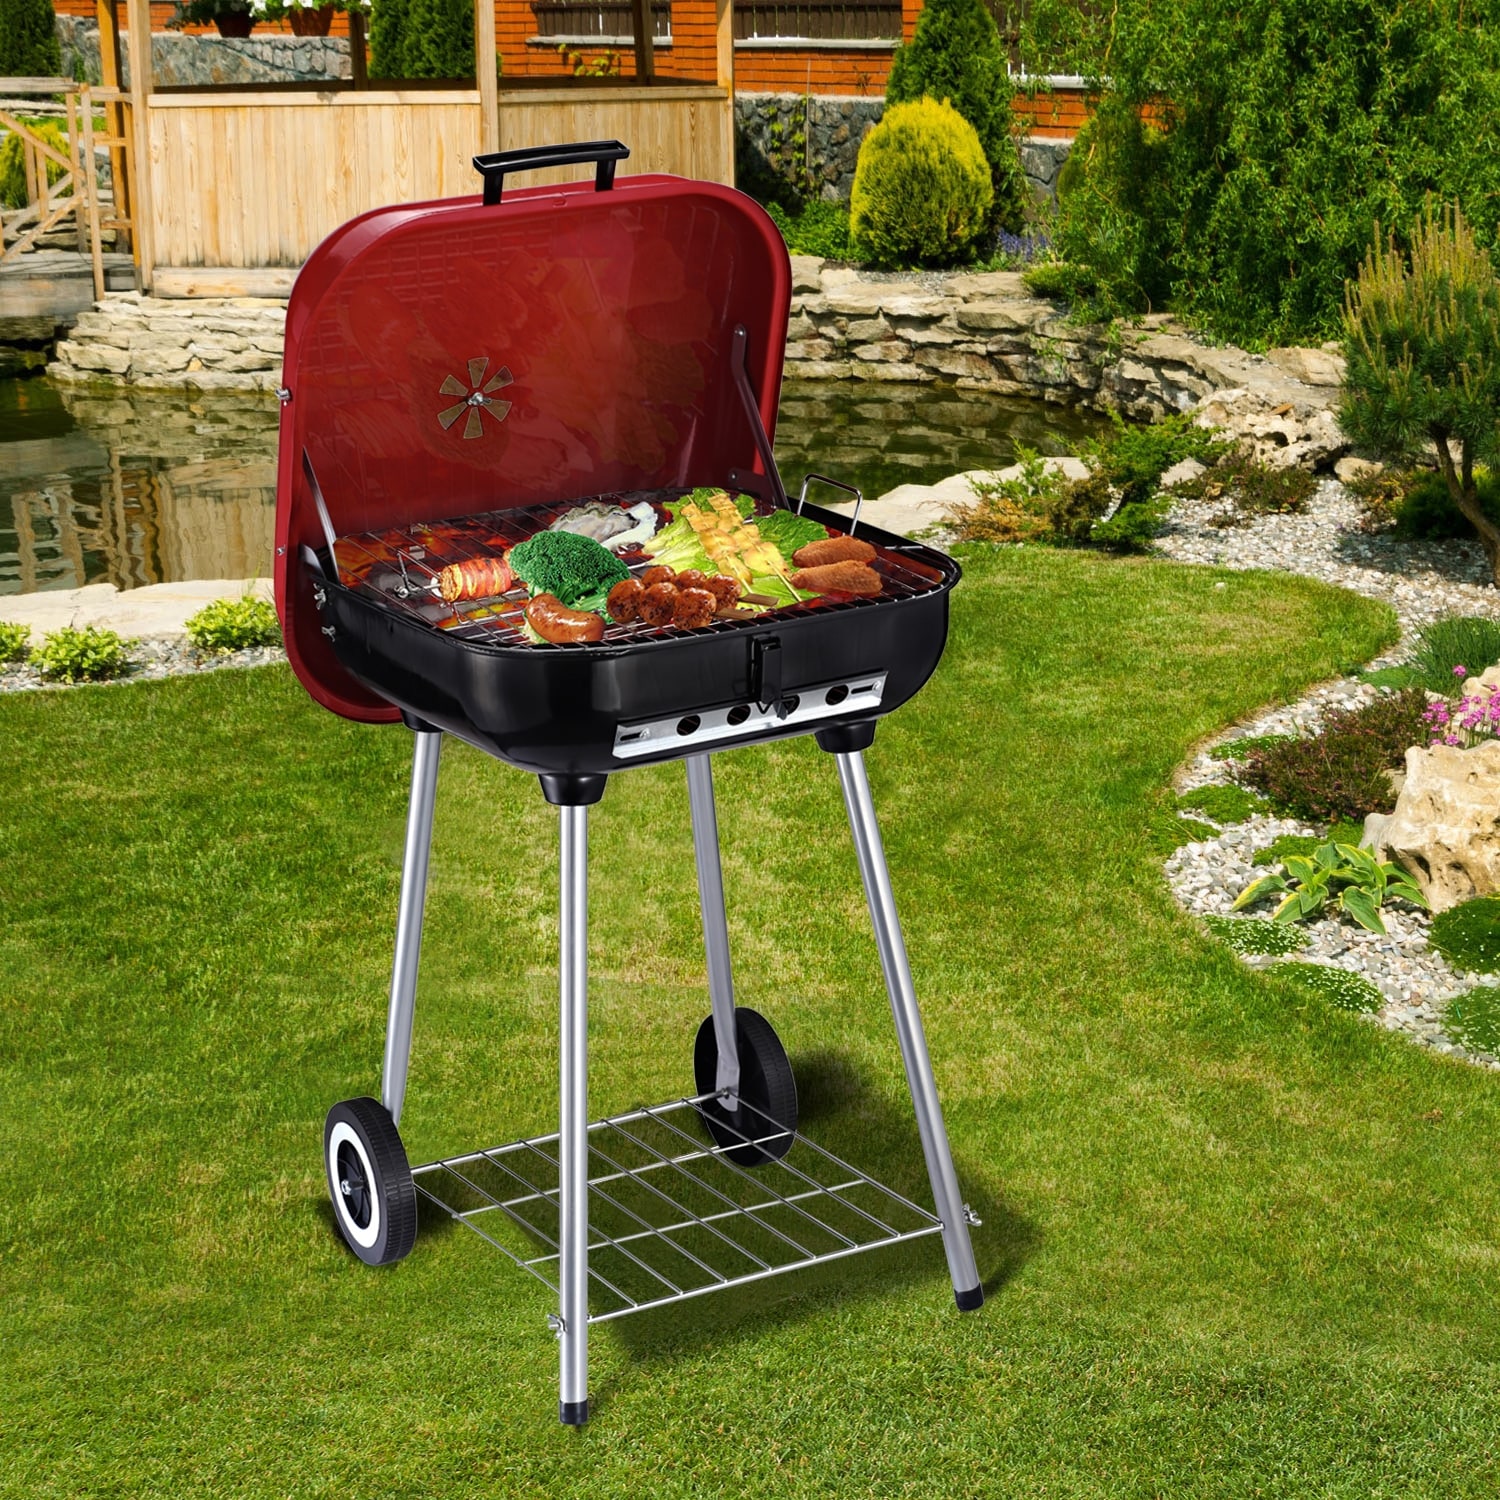 Outsunny 2 in 1 Portable Charcoal Grill Barbecue Trolley BBQ Heat